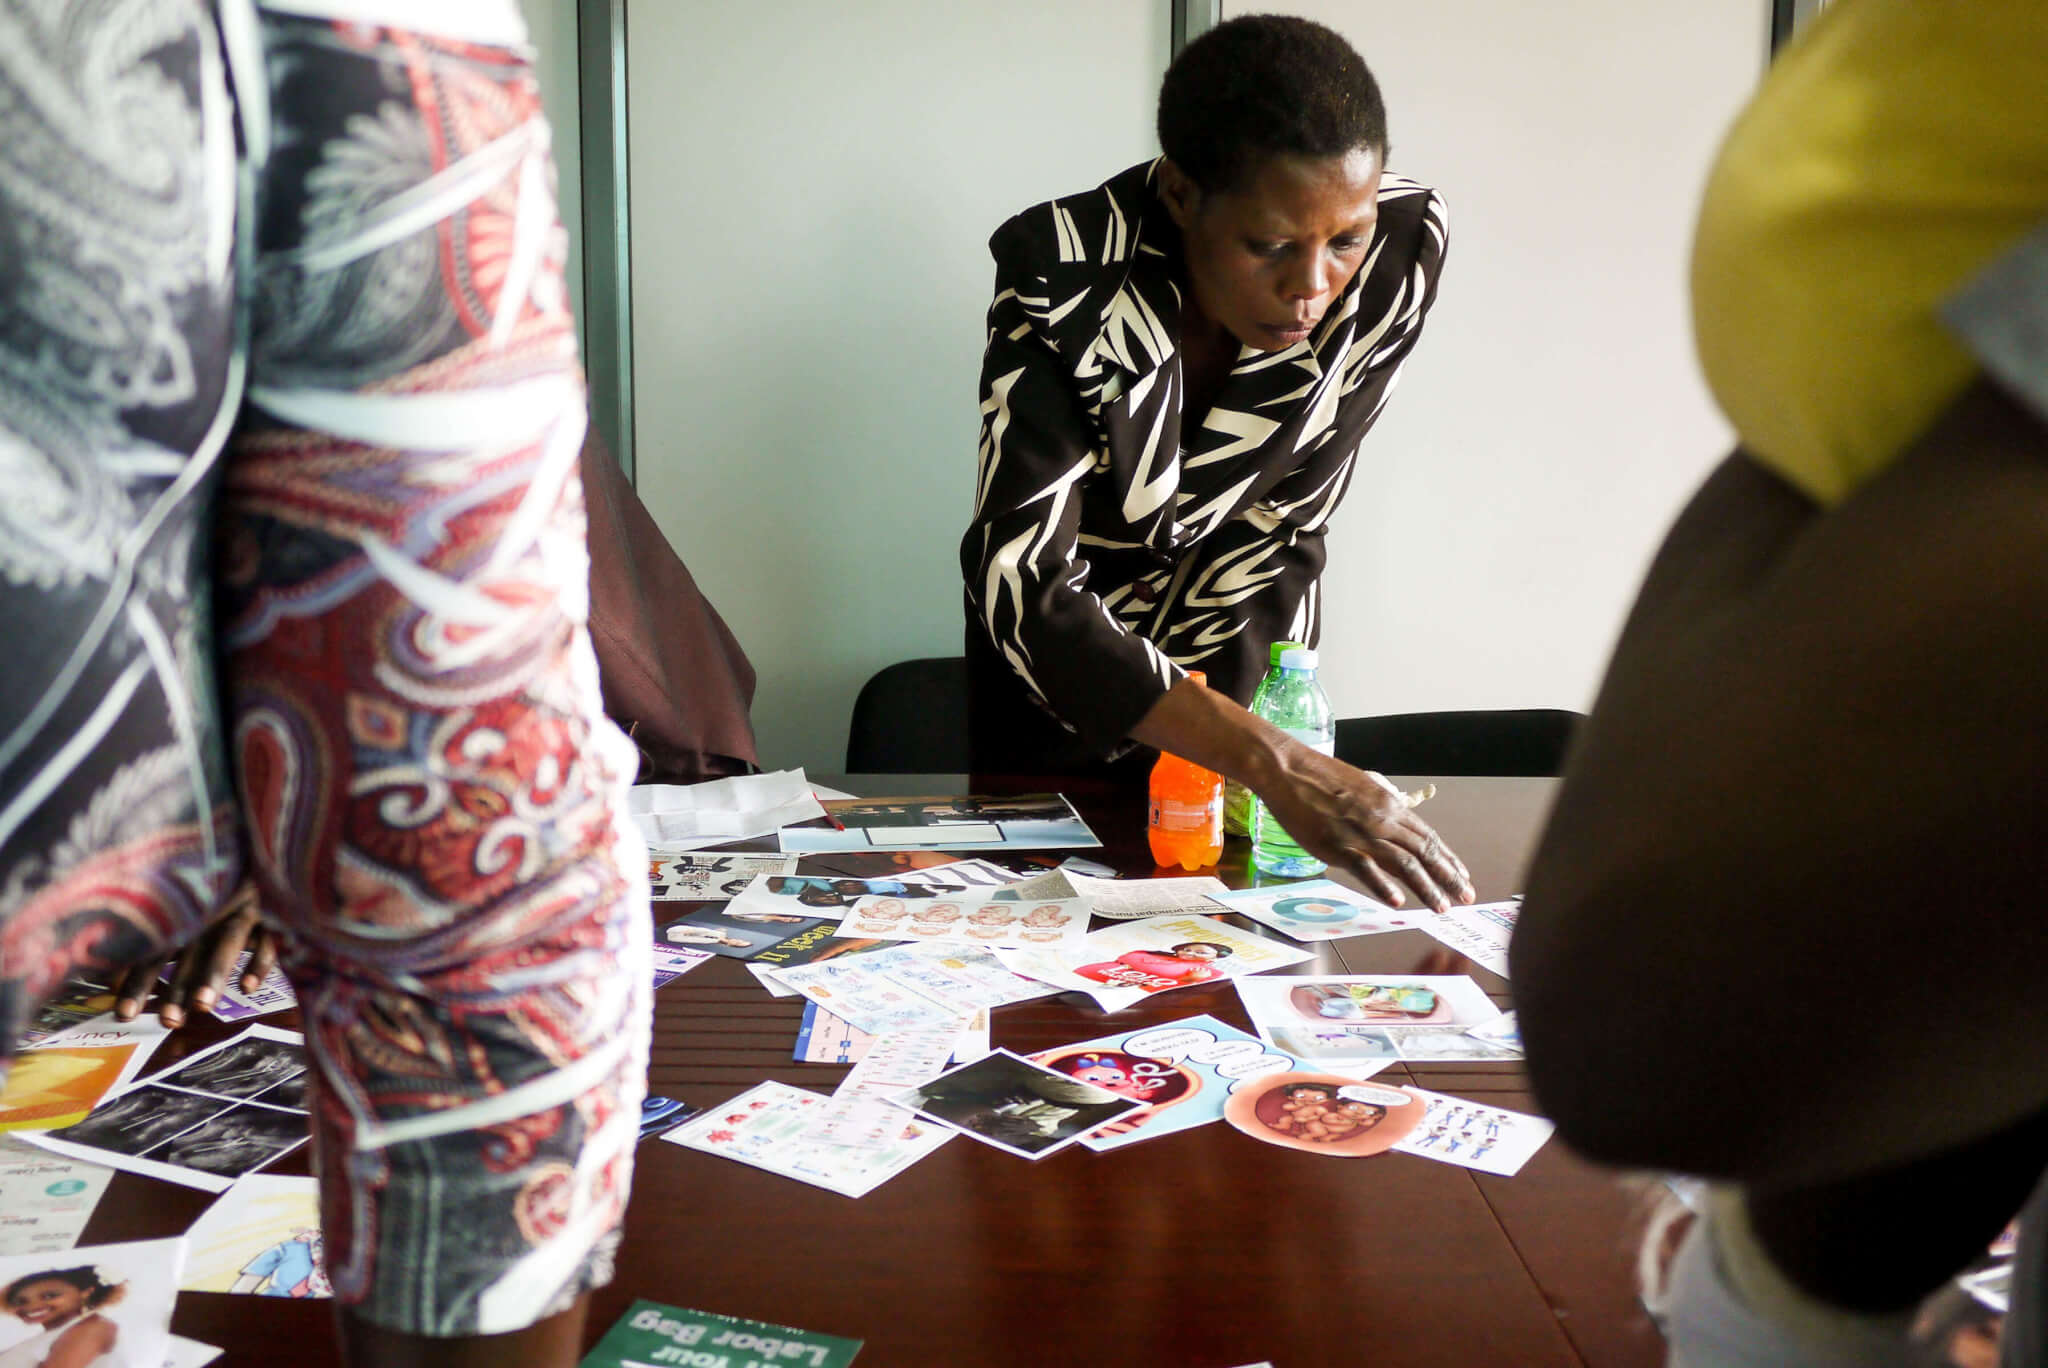 Women taking part in a Better Outcomes in Labour Difficulty workshop, sorting cards to share their pregnancy journey.